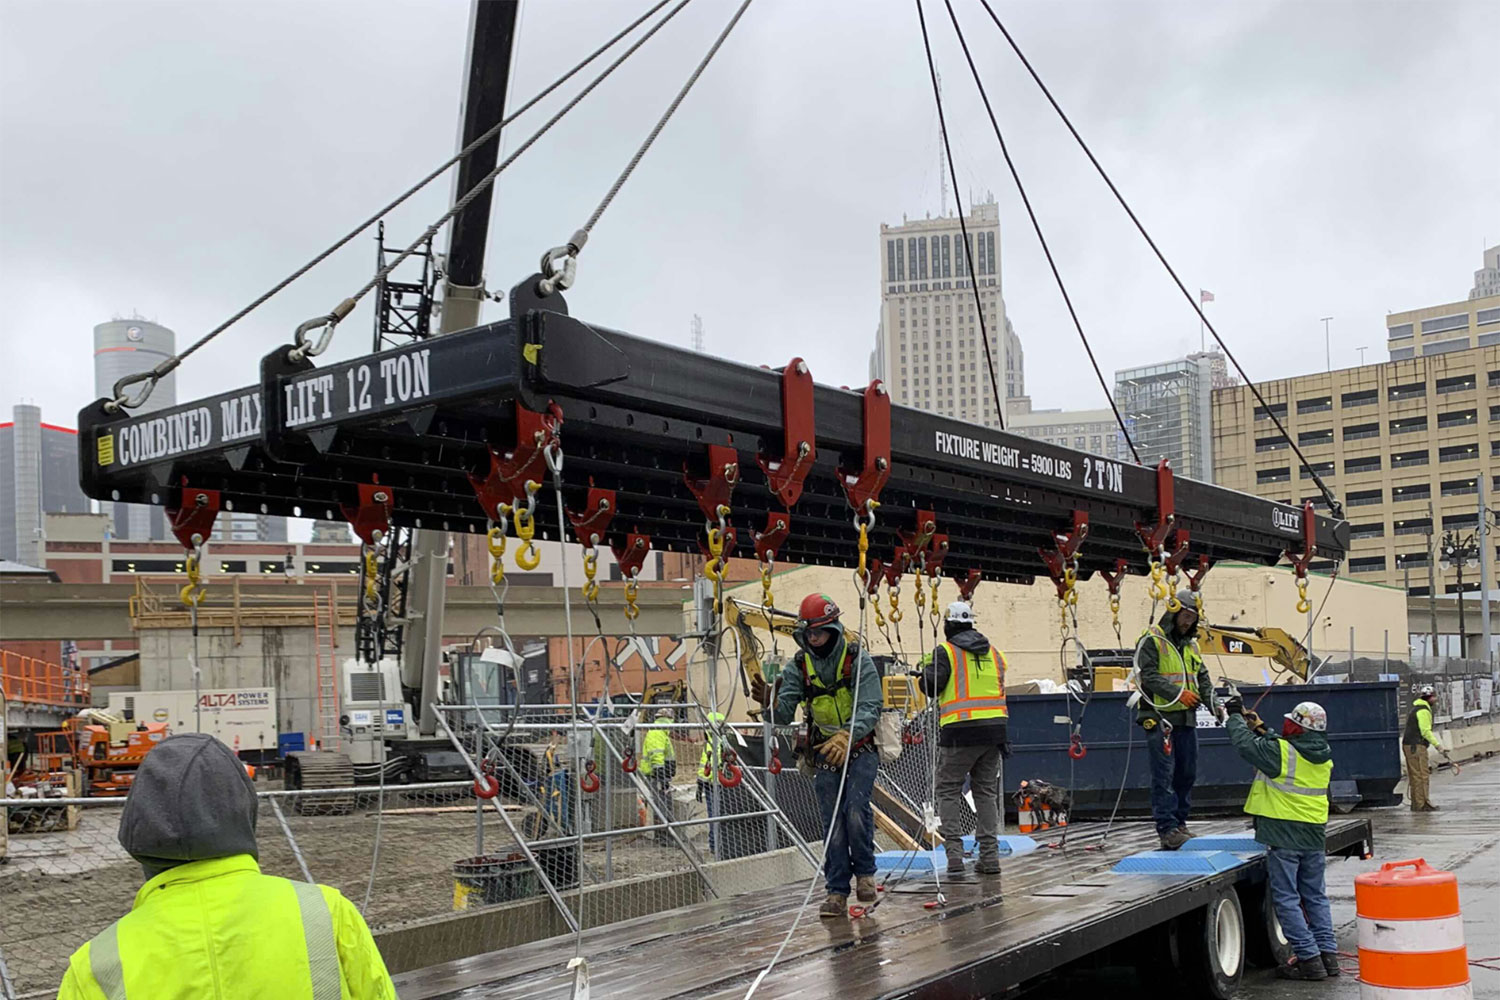 12-ton Lifting Bridle being prepared to lift a metal beam at a construction site